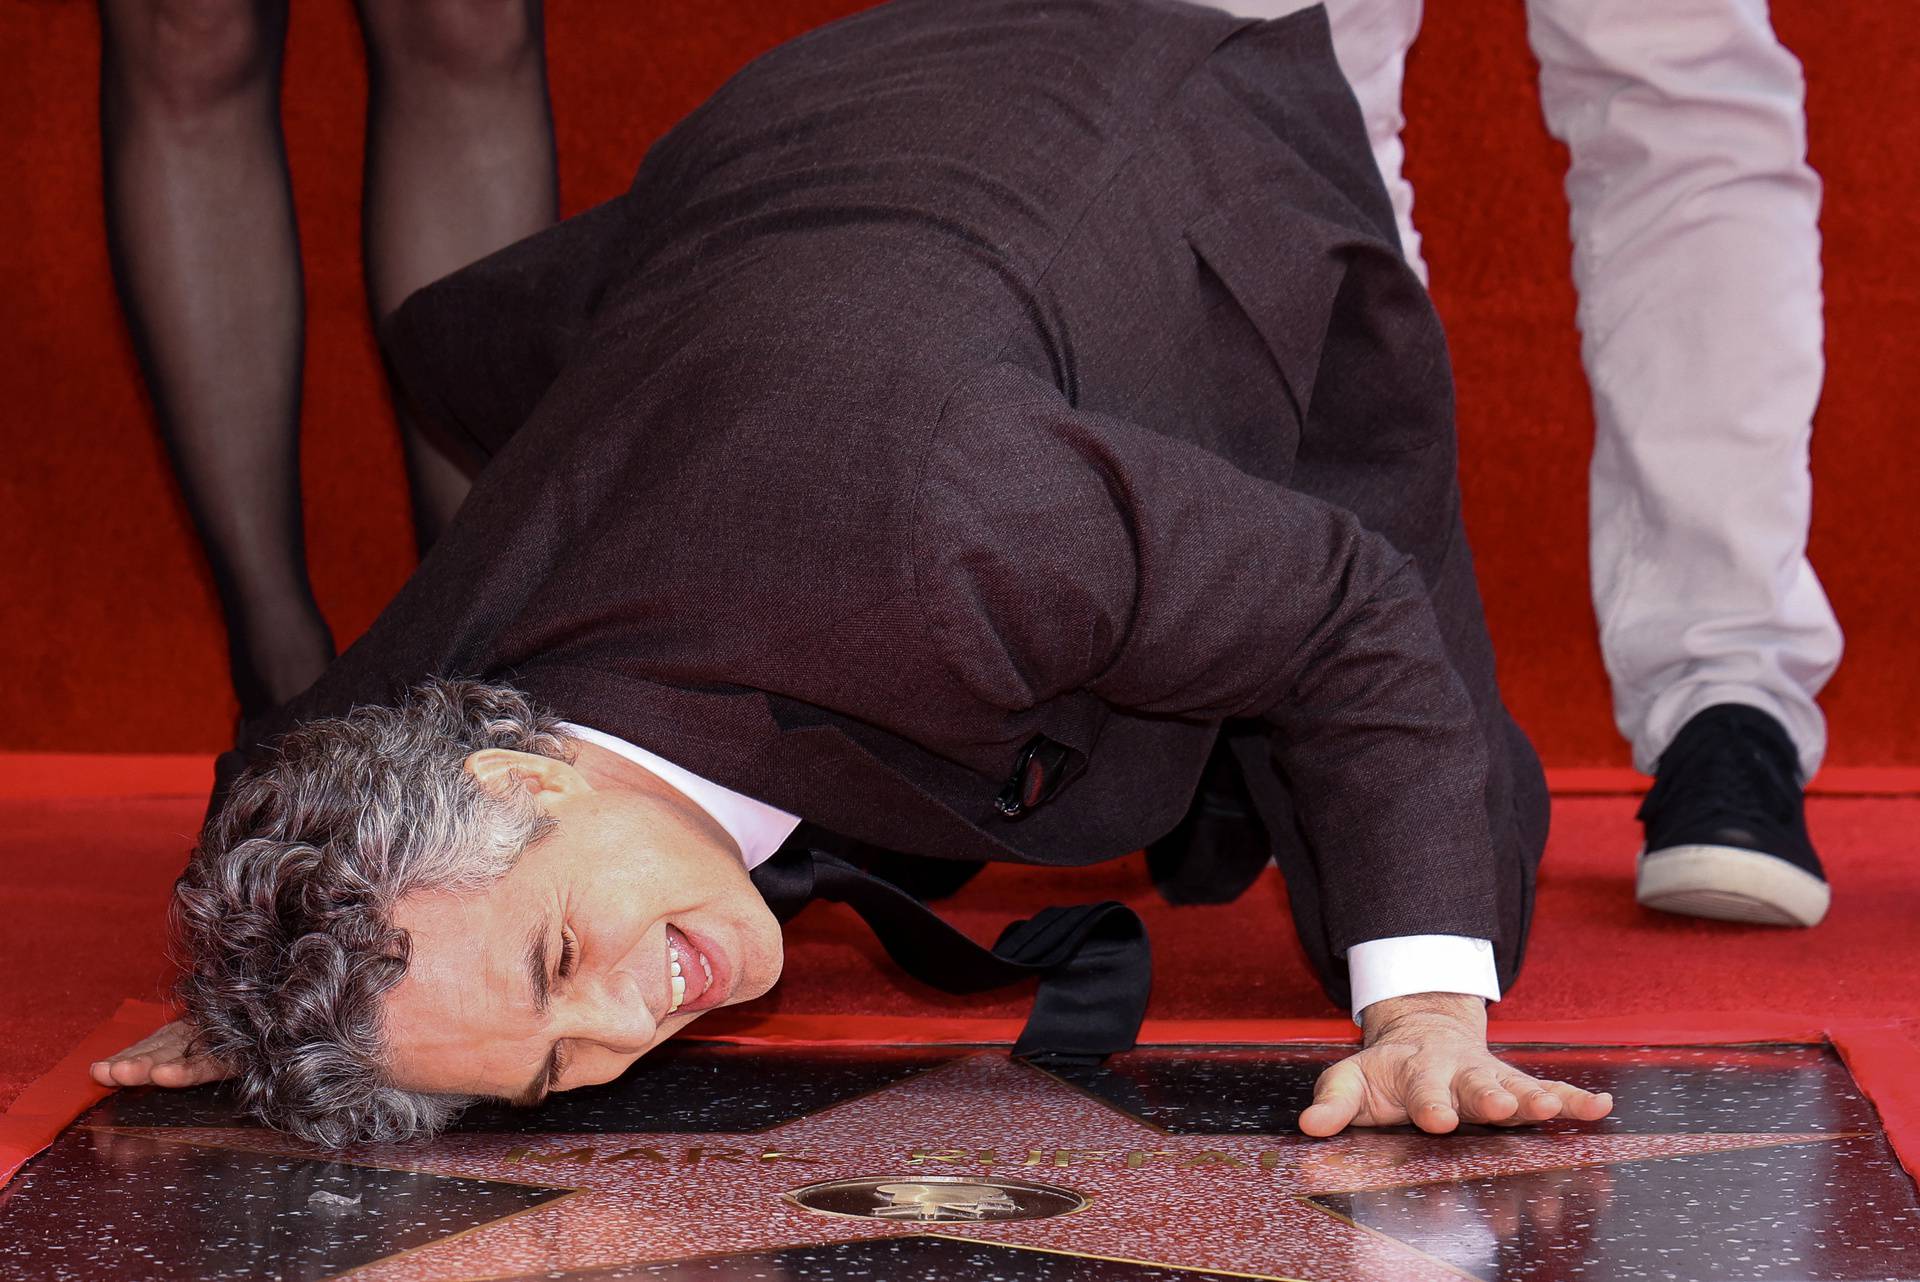 Actor Mark Ruffalo unveils his star on the Hollywood Walk of Fame in Los Angeles